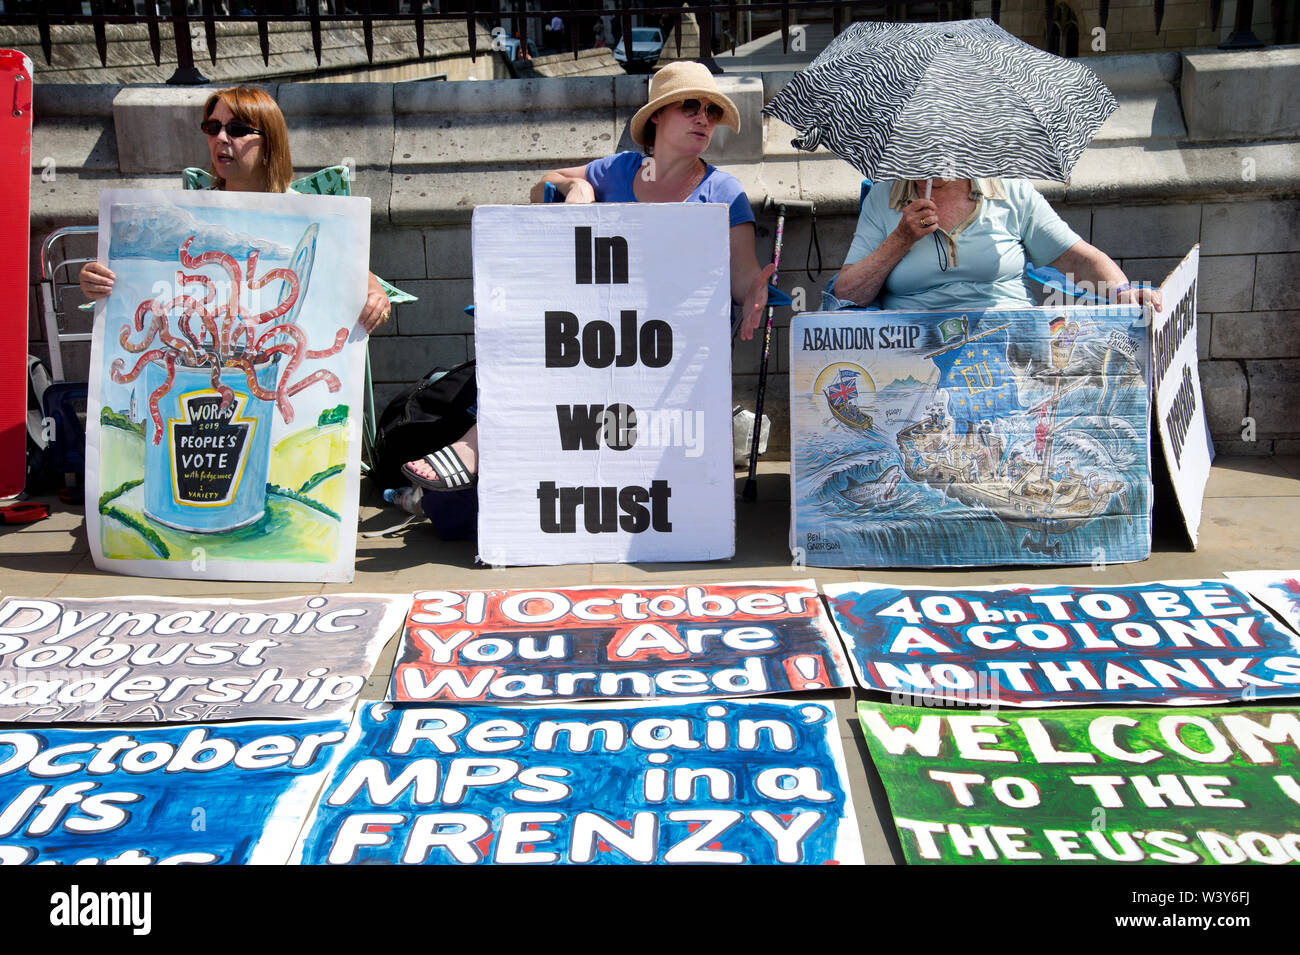 Westminster, Parliament Square. Leave protesters with placards including one saying 'In Bojo we trust'. Stock Photo